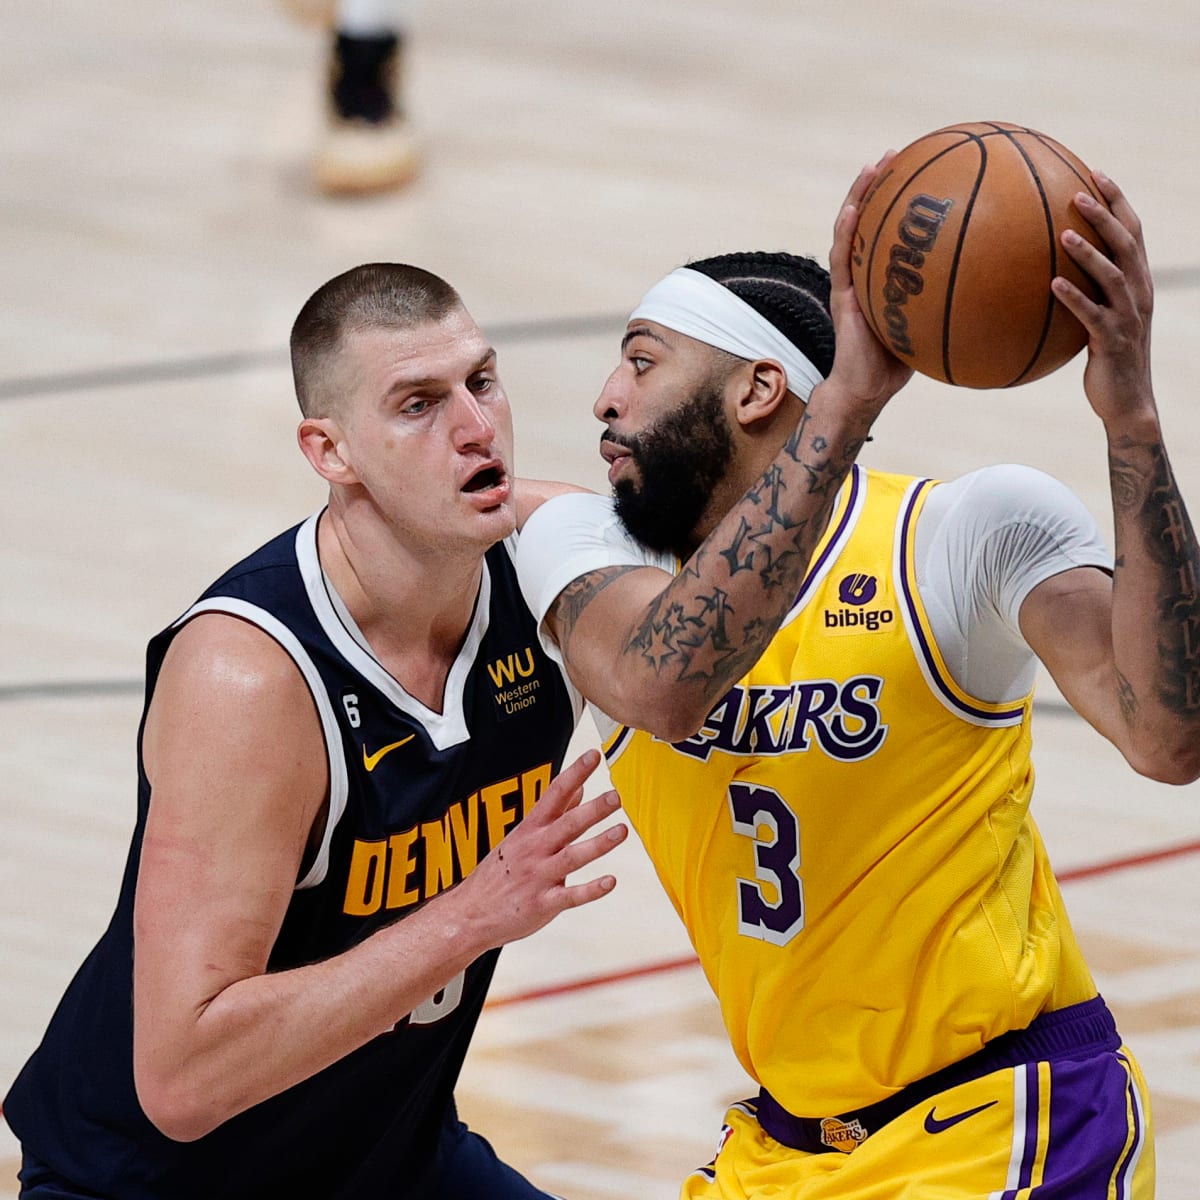 Lakers vs. Nuggets final score, results: Denver completes sweep to advance  to NBA Finals